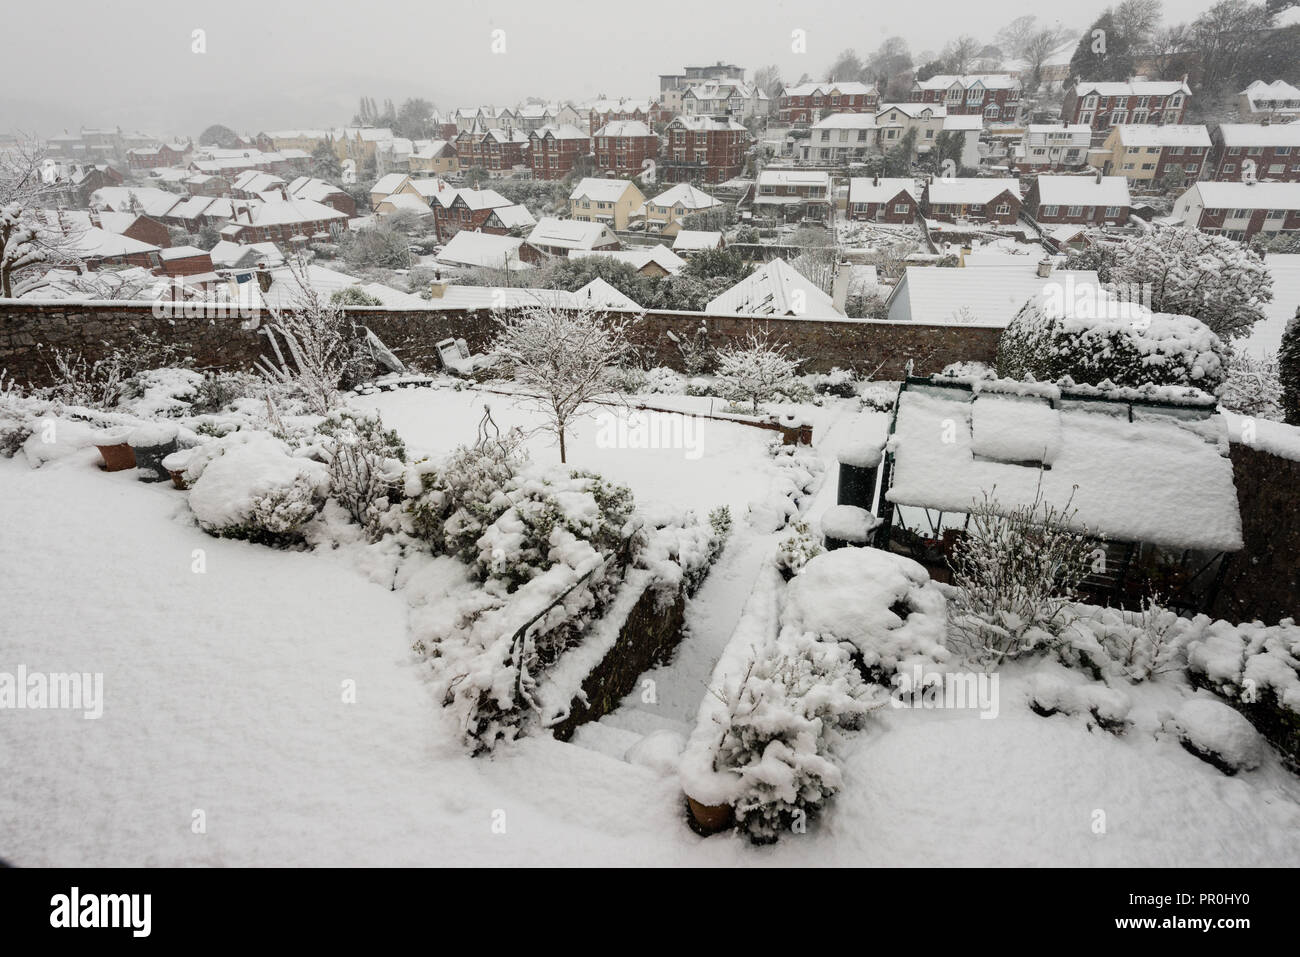 Snow over a garden and surrounding town buildings and their rooftops. Stock Photo